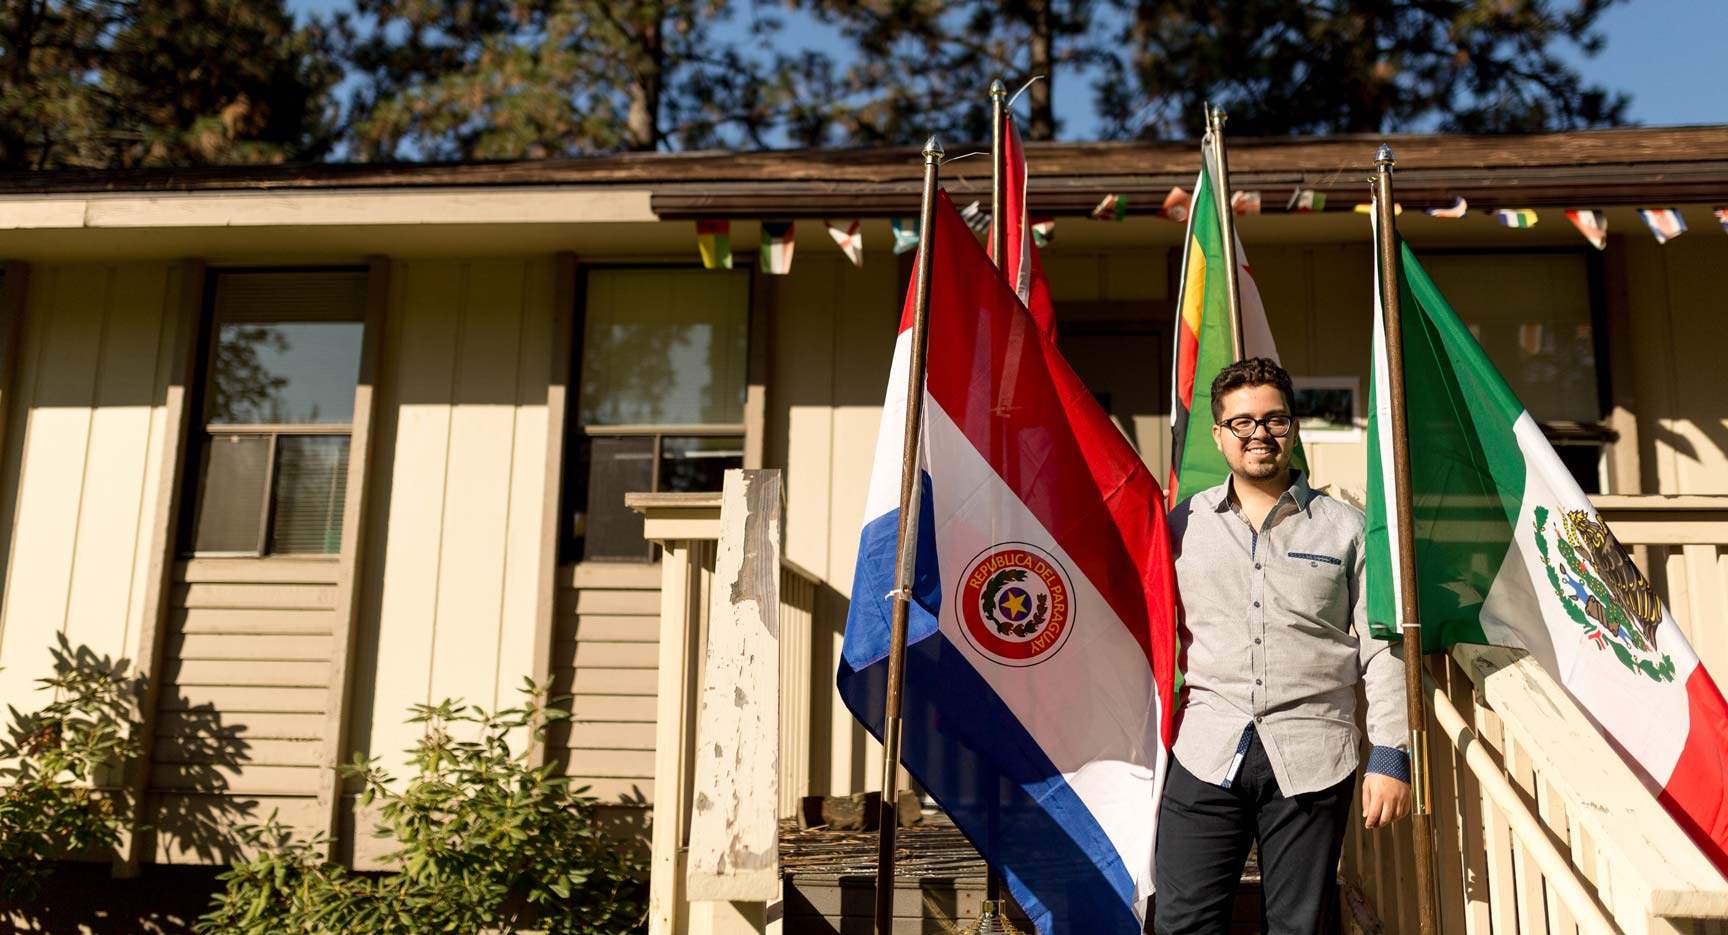 Roland Beaz stands with four international flags, including the Republic of Paraguay flag, on a sunny day.